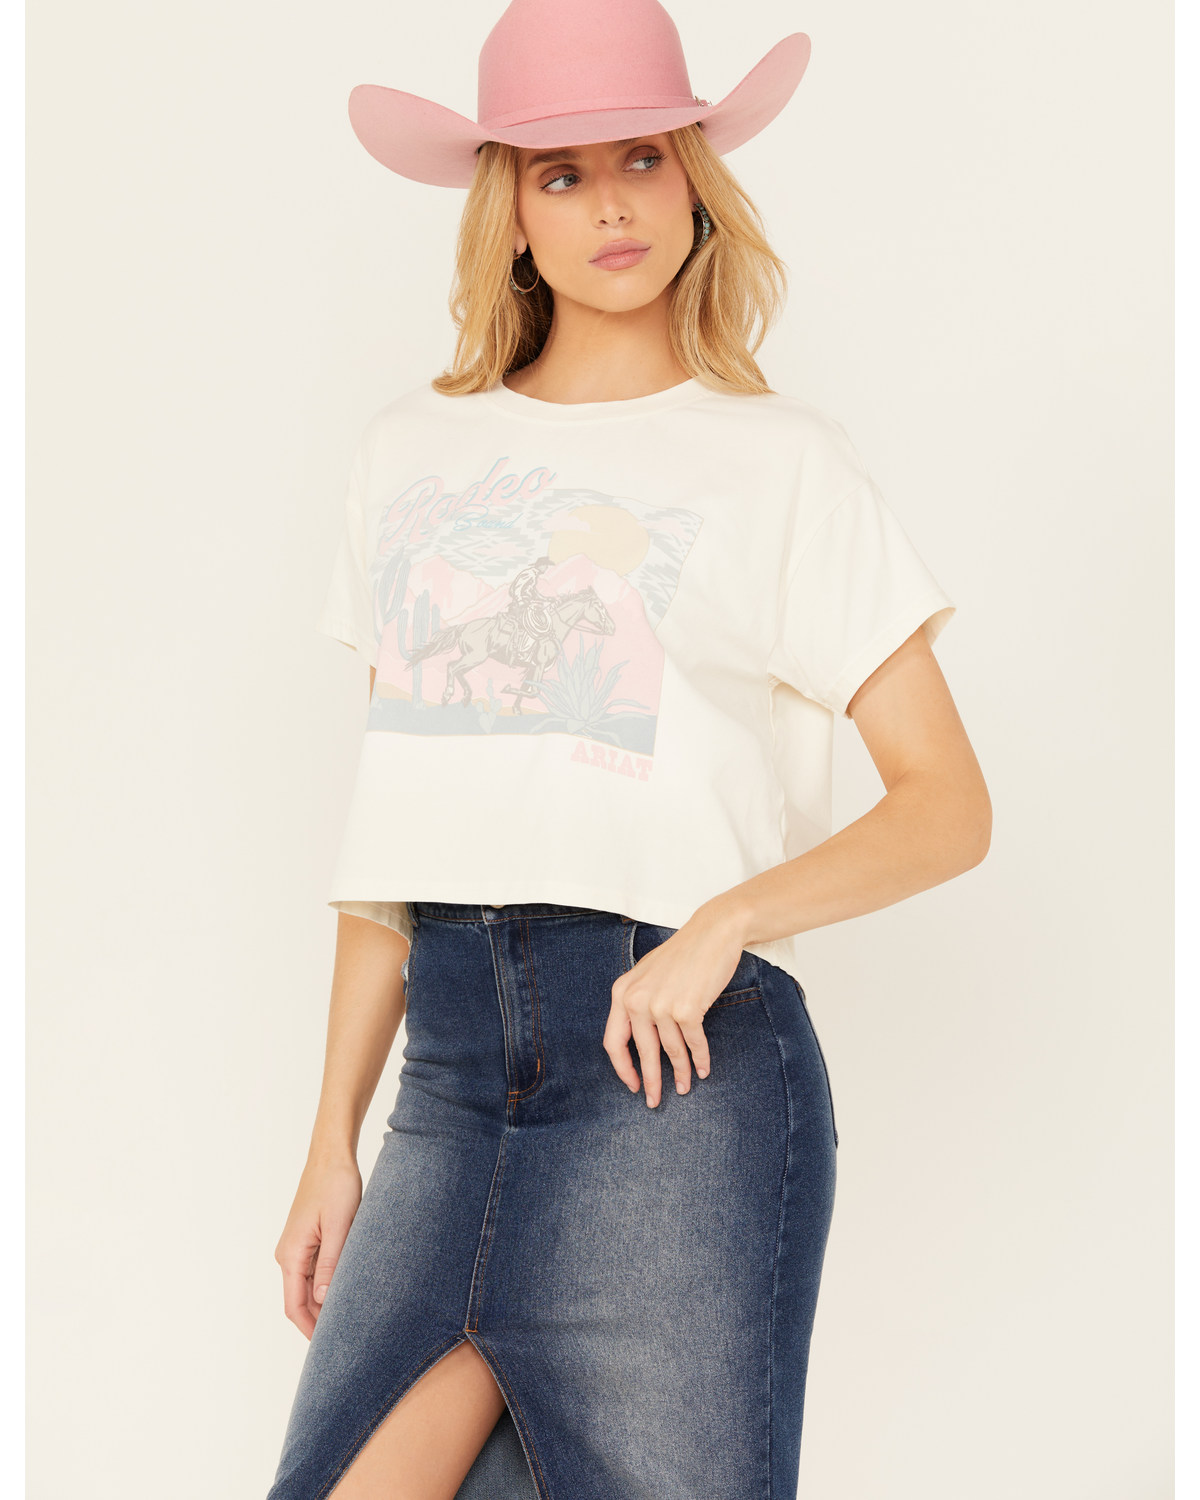 Ariat Women's Rodeo Bound Short Sleeve Cropped Graphic Tee